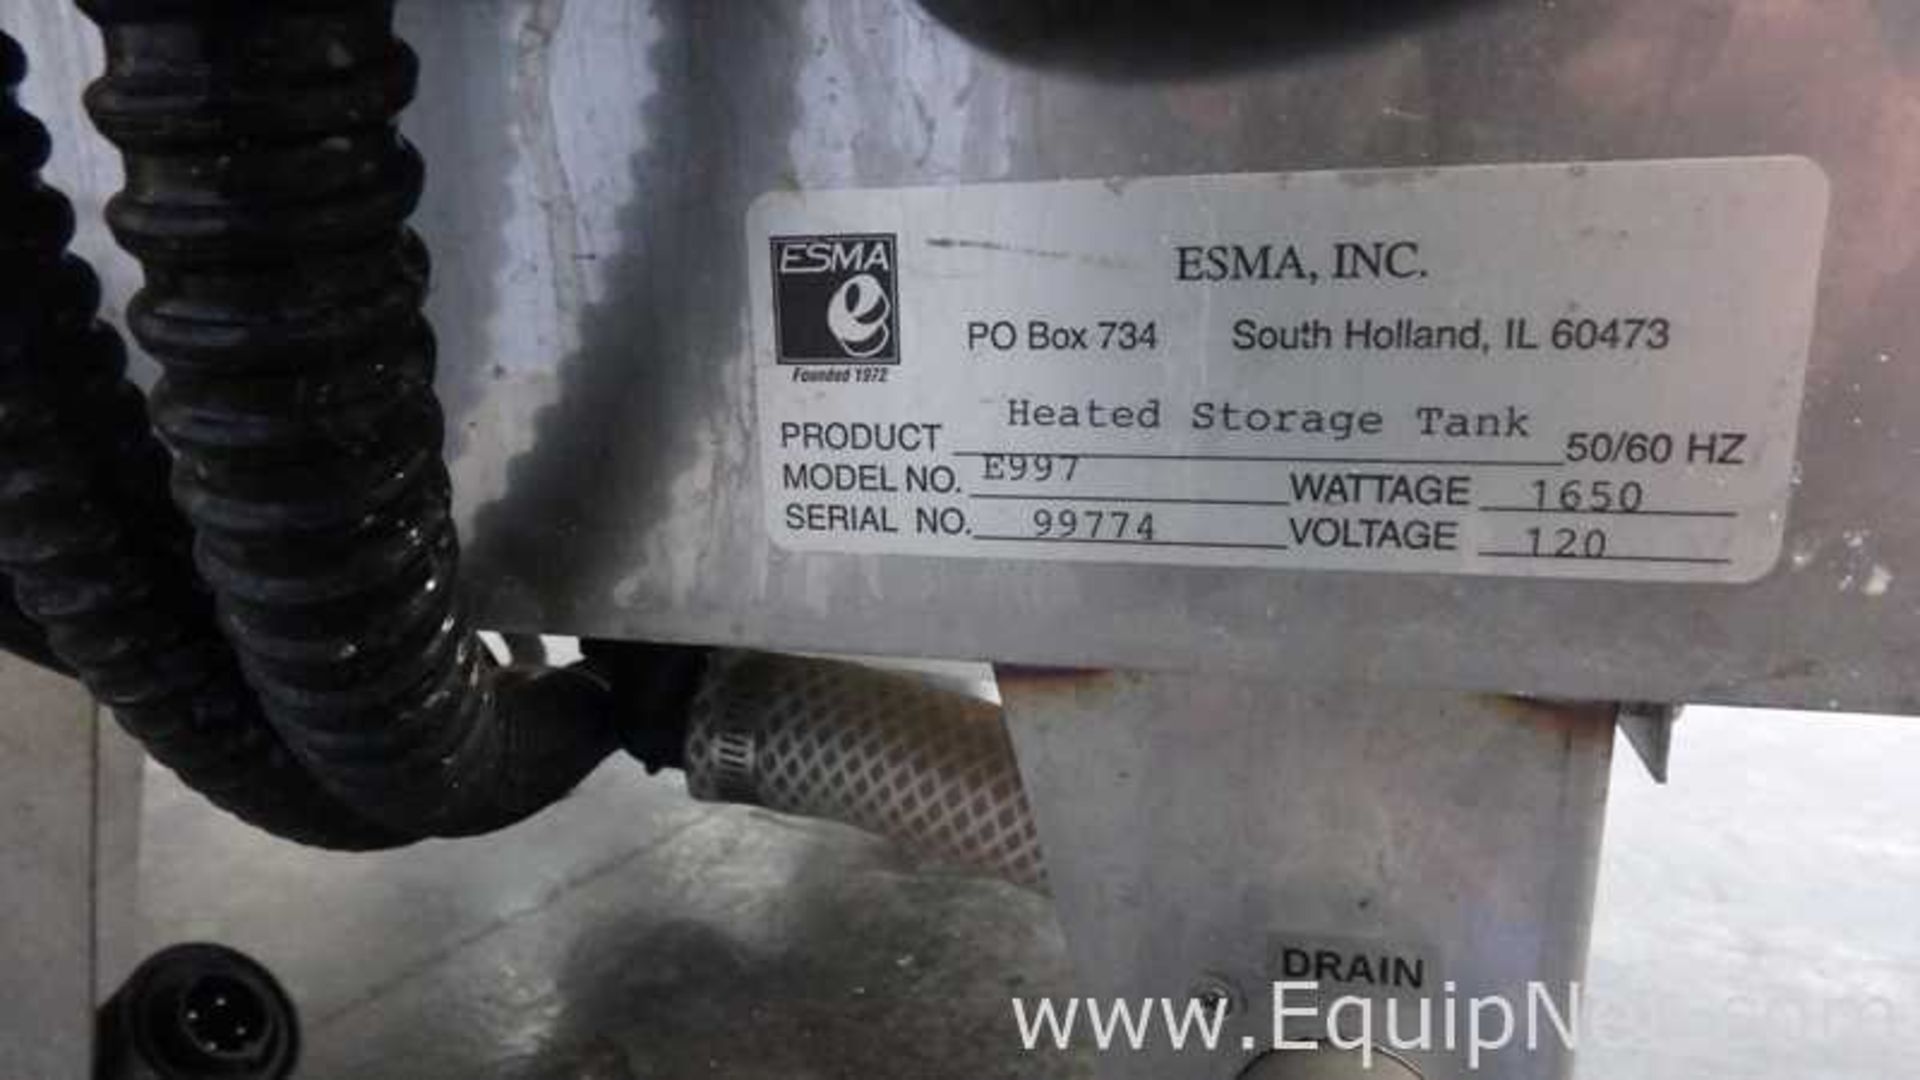 ESMA Inc. E700 Ultrasonic Cleaning System with E997 30Gal Heated Storage Tank - Image 38 of 38